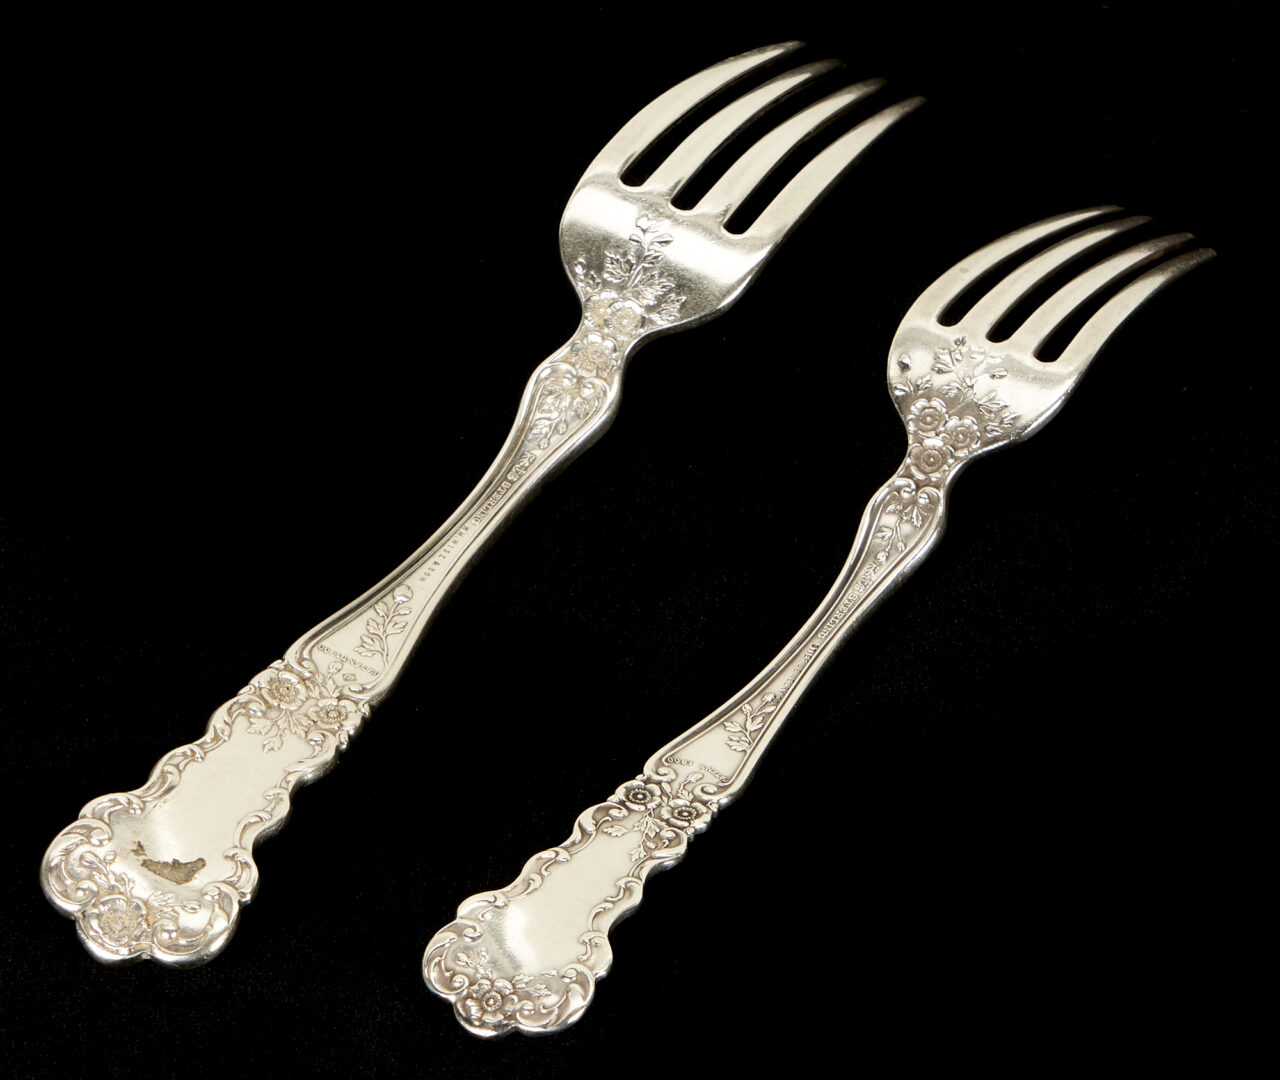 Lot 341: 52 Pieces of Gorham Buttercup Sterling Silver Flatware